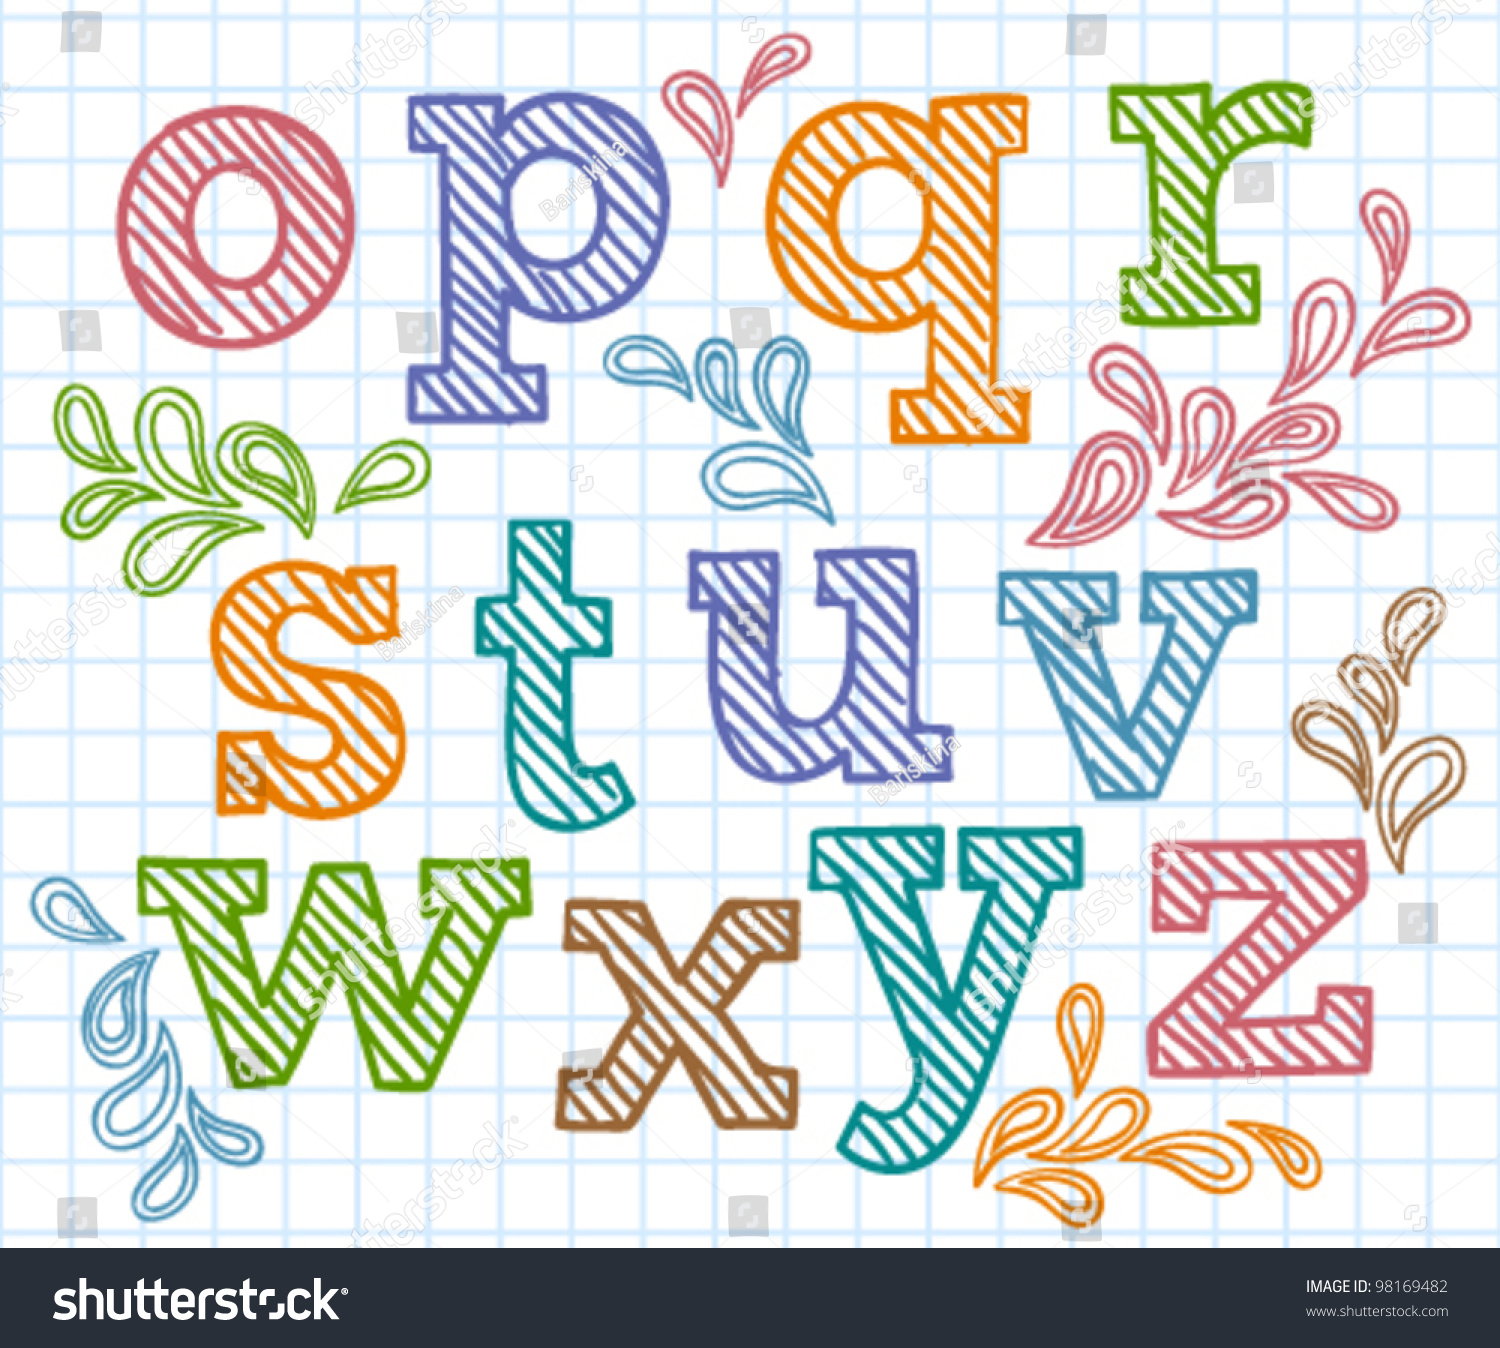 Vector Set With Colorful Hand Written Abc Letters - 98169482 : Shutterstock